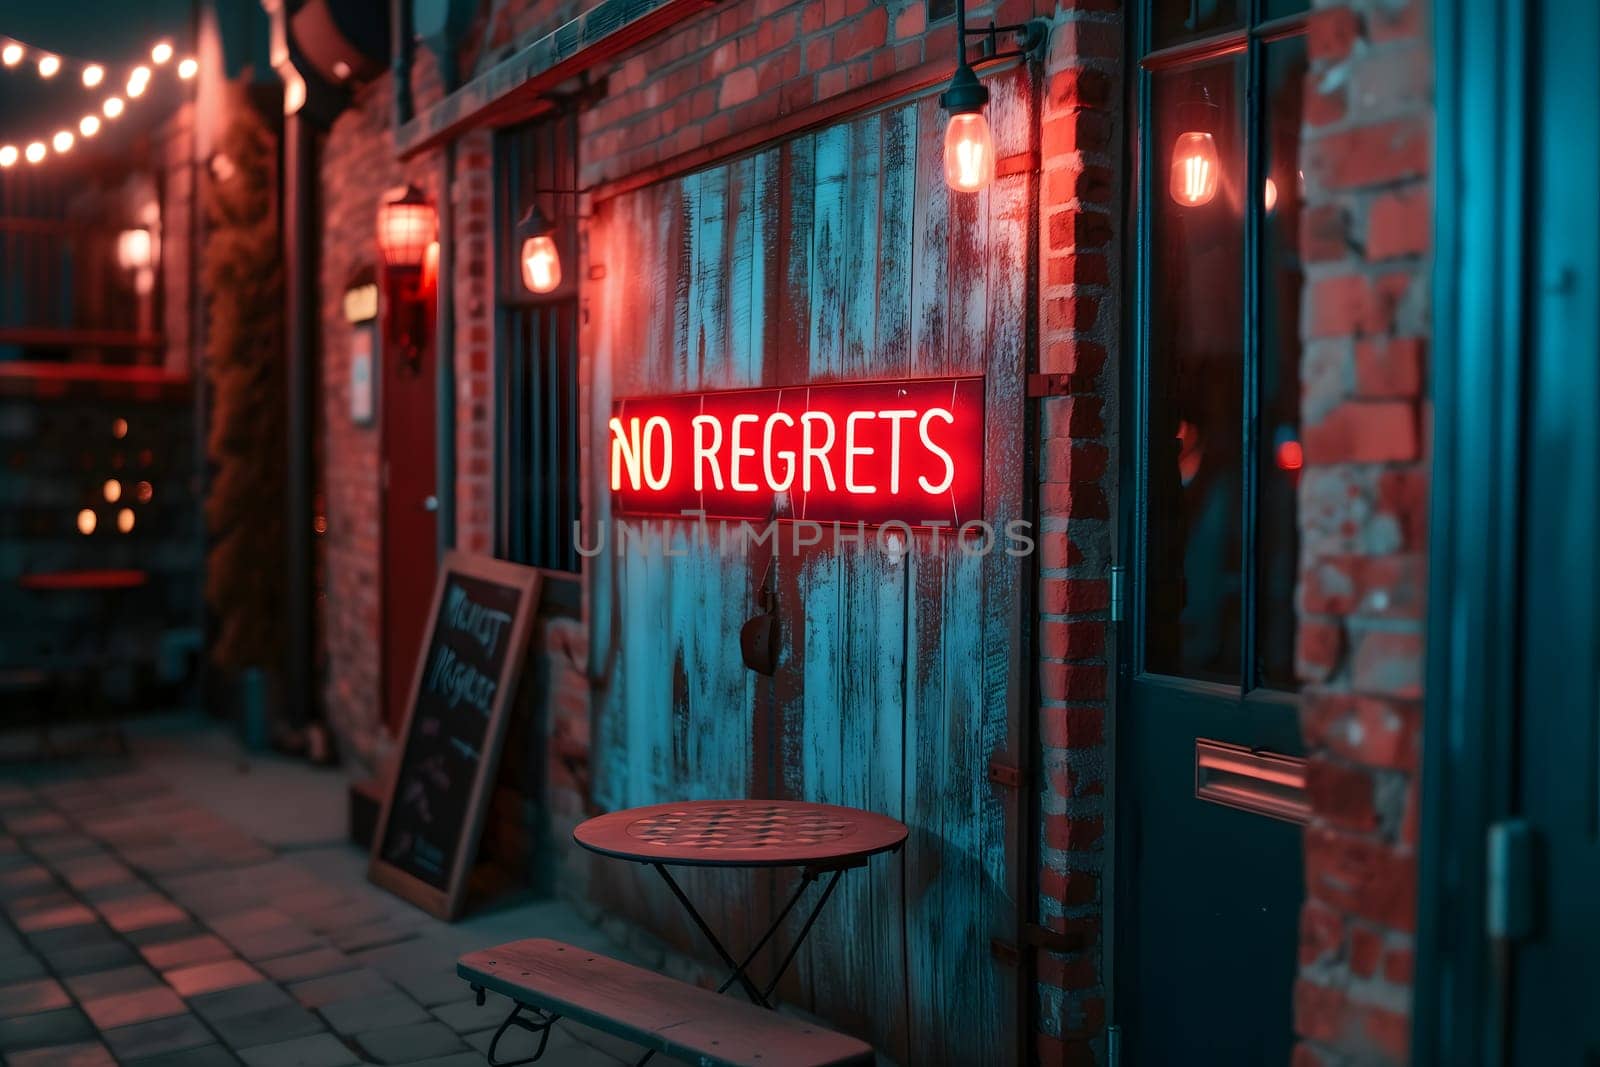 A neon sign that says NO REGRETS on a wall. Neural network generated image. Not based on any actual scene or pattern.